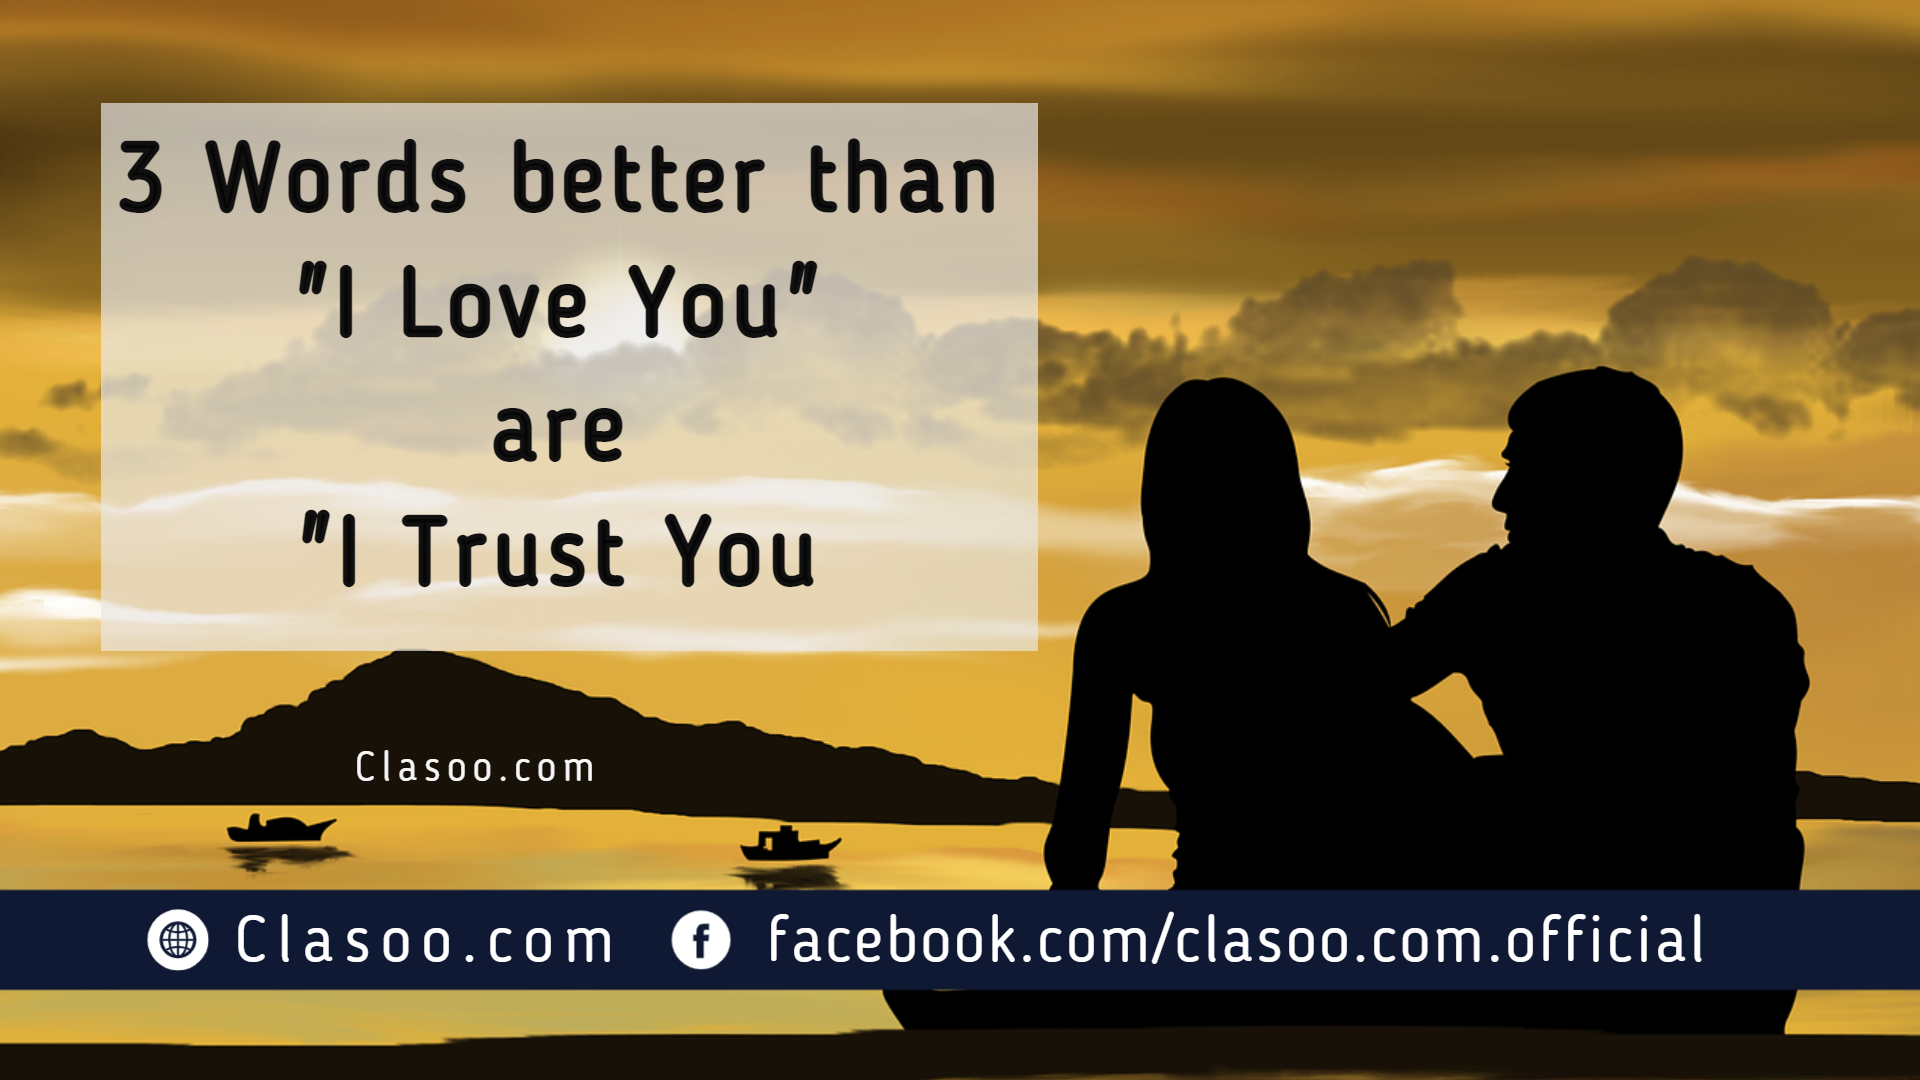 3 Words better than "I Love You" are "I Trust You"